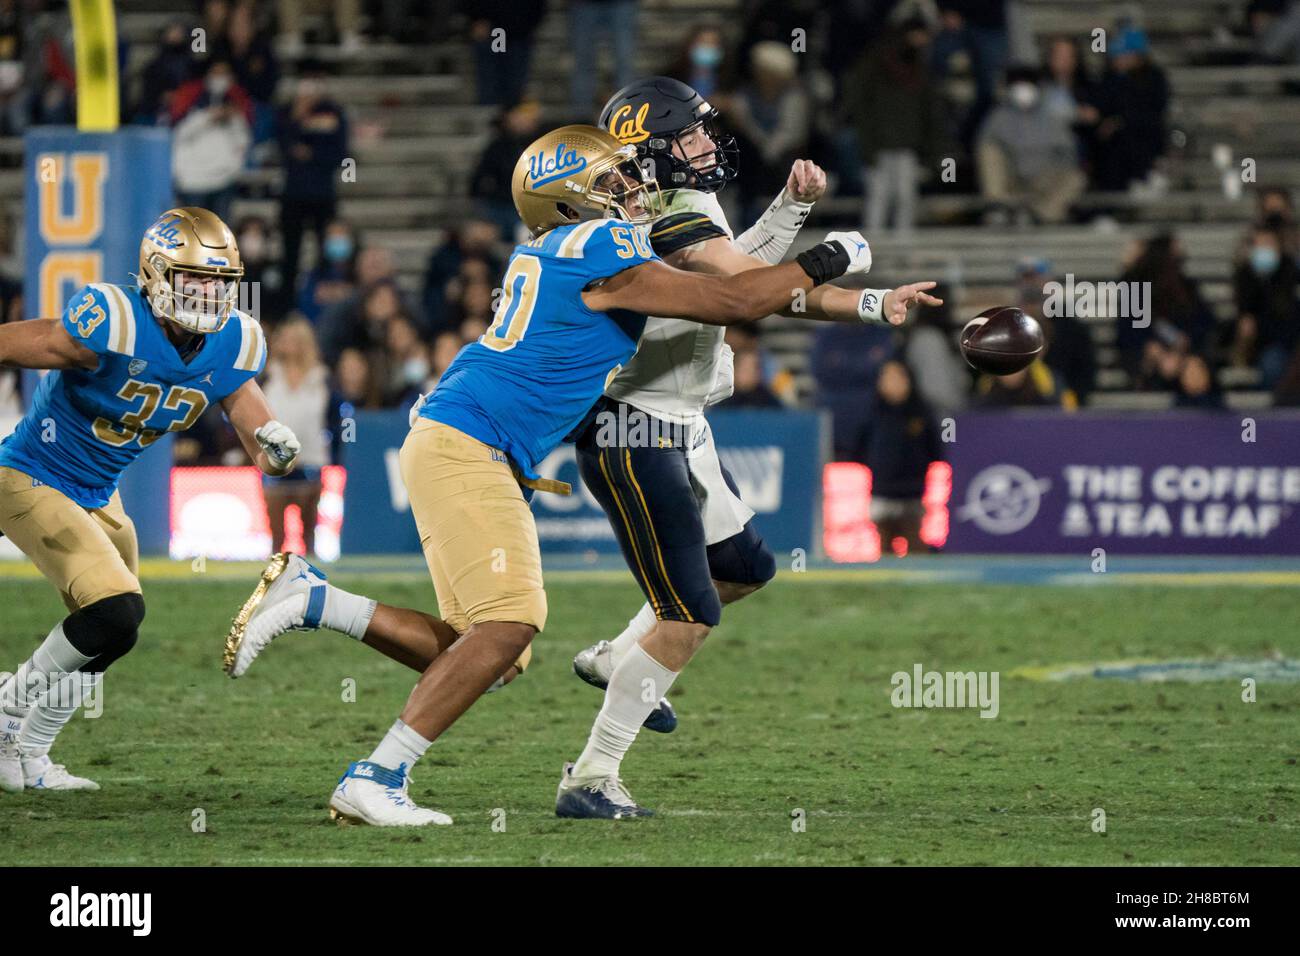 UCLA Bruins defensive lineman Tyler Manoa (50) wraps up California Golden Bears quarterback Chase Garbers (7) as he tries to toss a pass during a NCAA Stock Photo